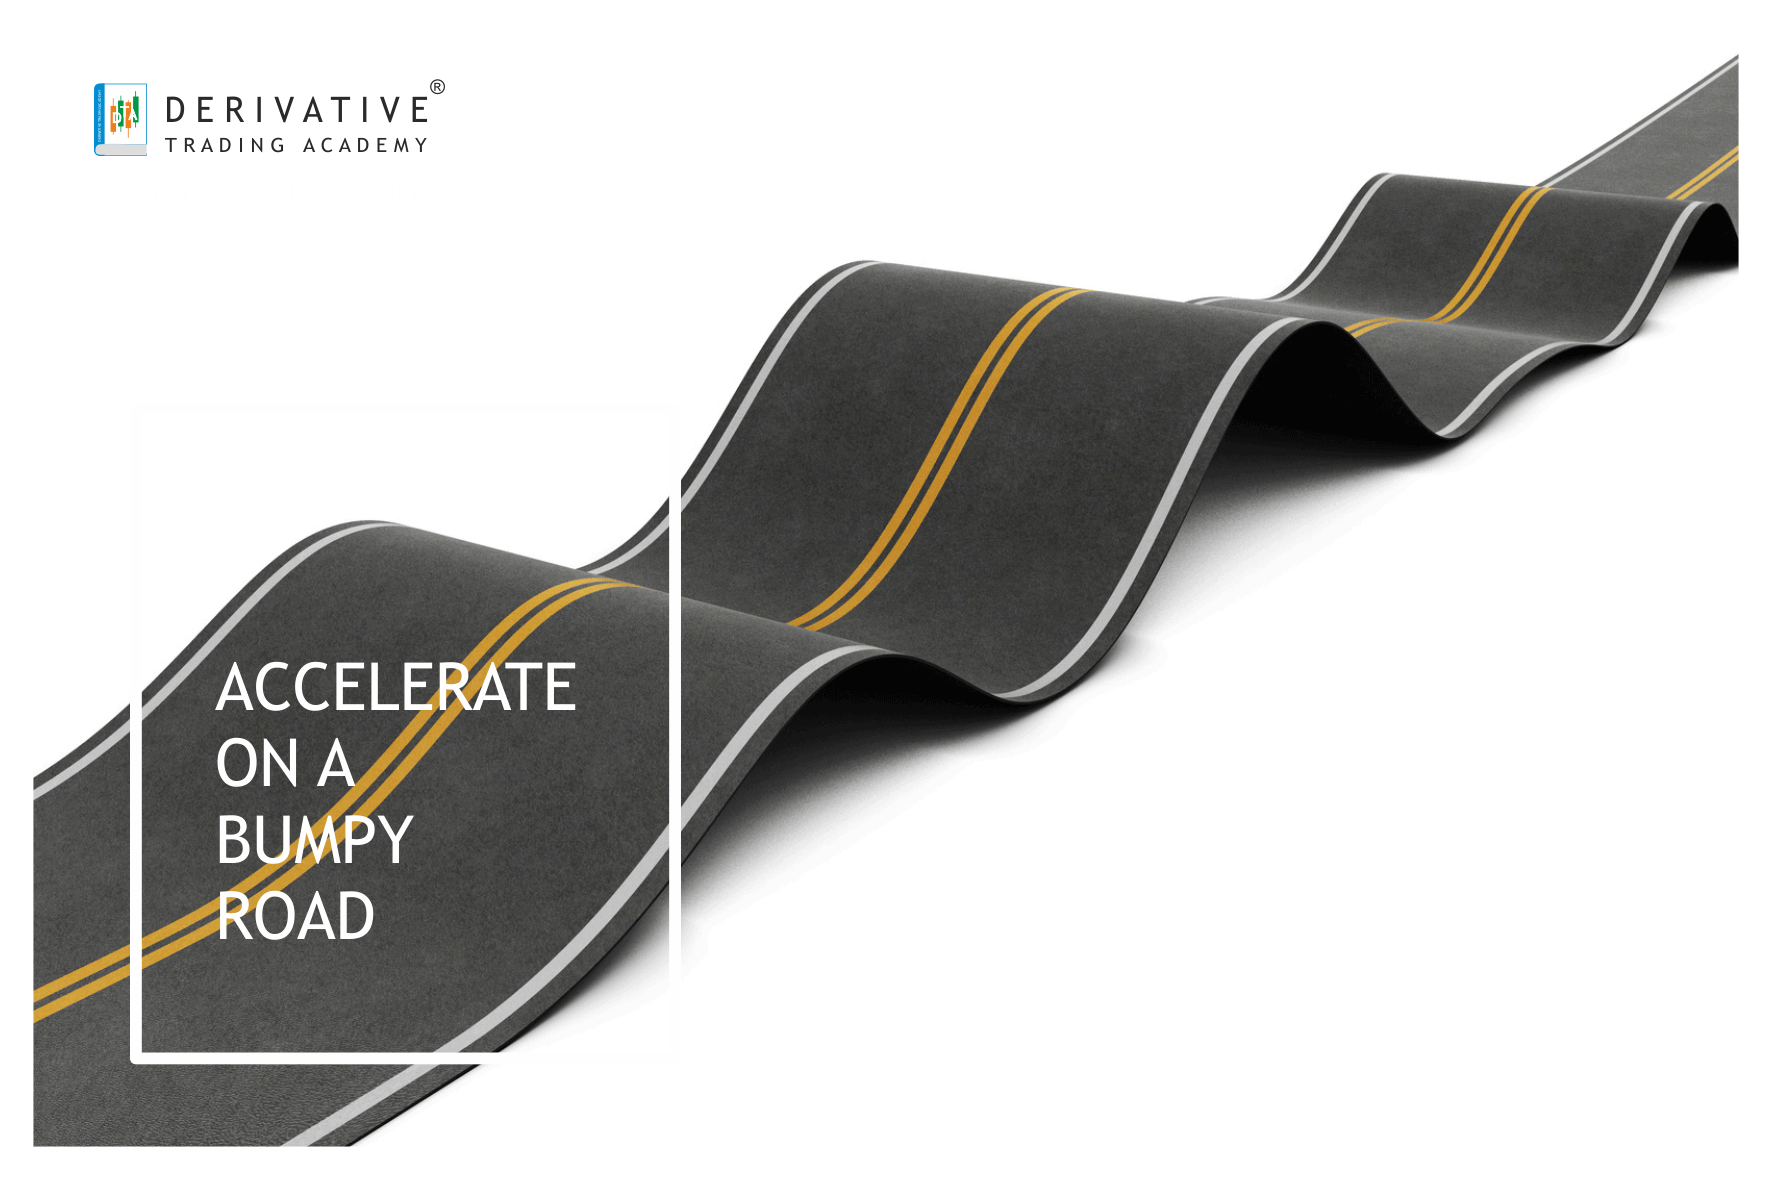 Accelerate On A Bumpy Road Derivative Trading Academy